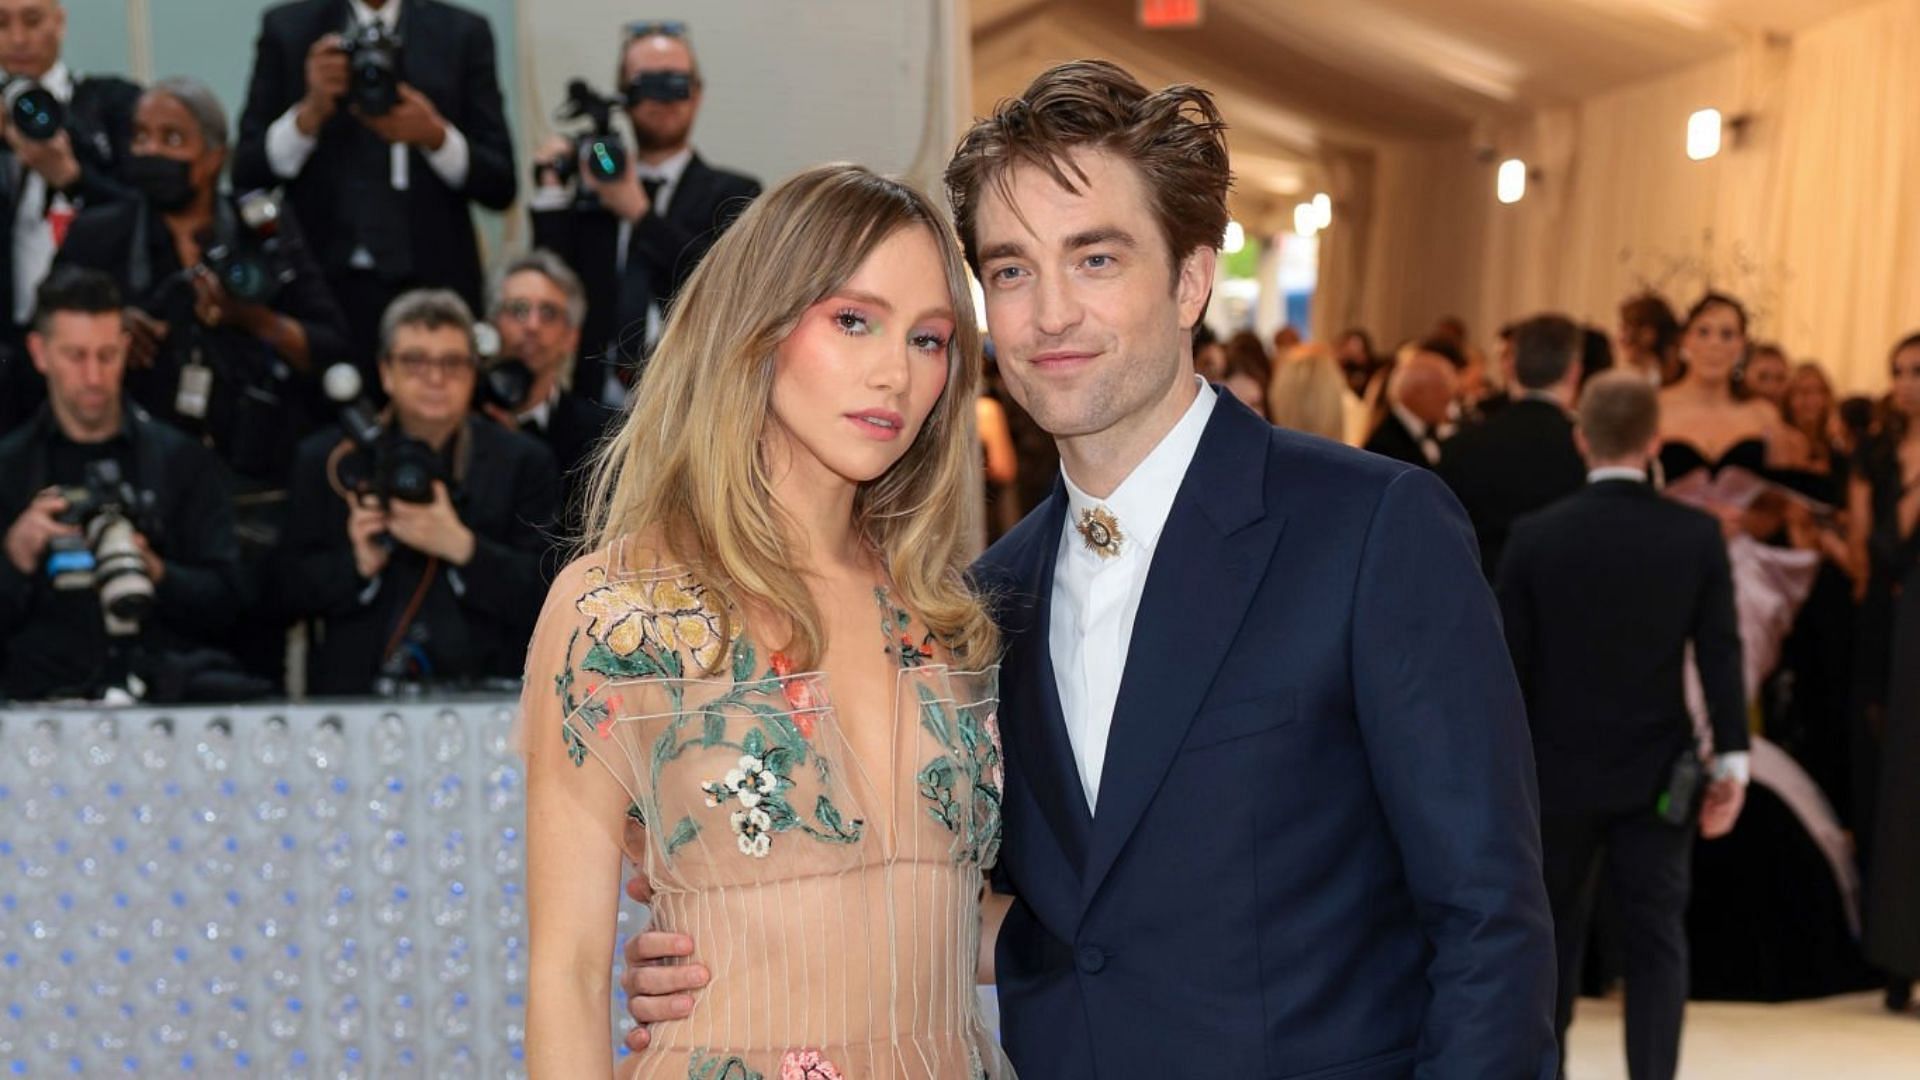 Robert Pattinson and Suki Waterhouse (Photo by Dimitrios Kambouris/Getty Images for The Met Museum/Vogue)